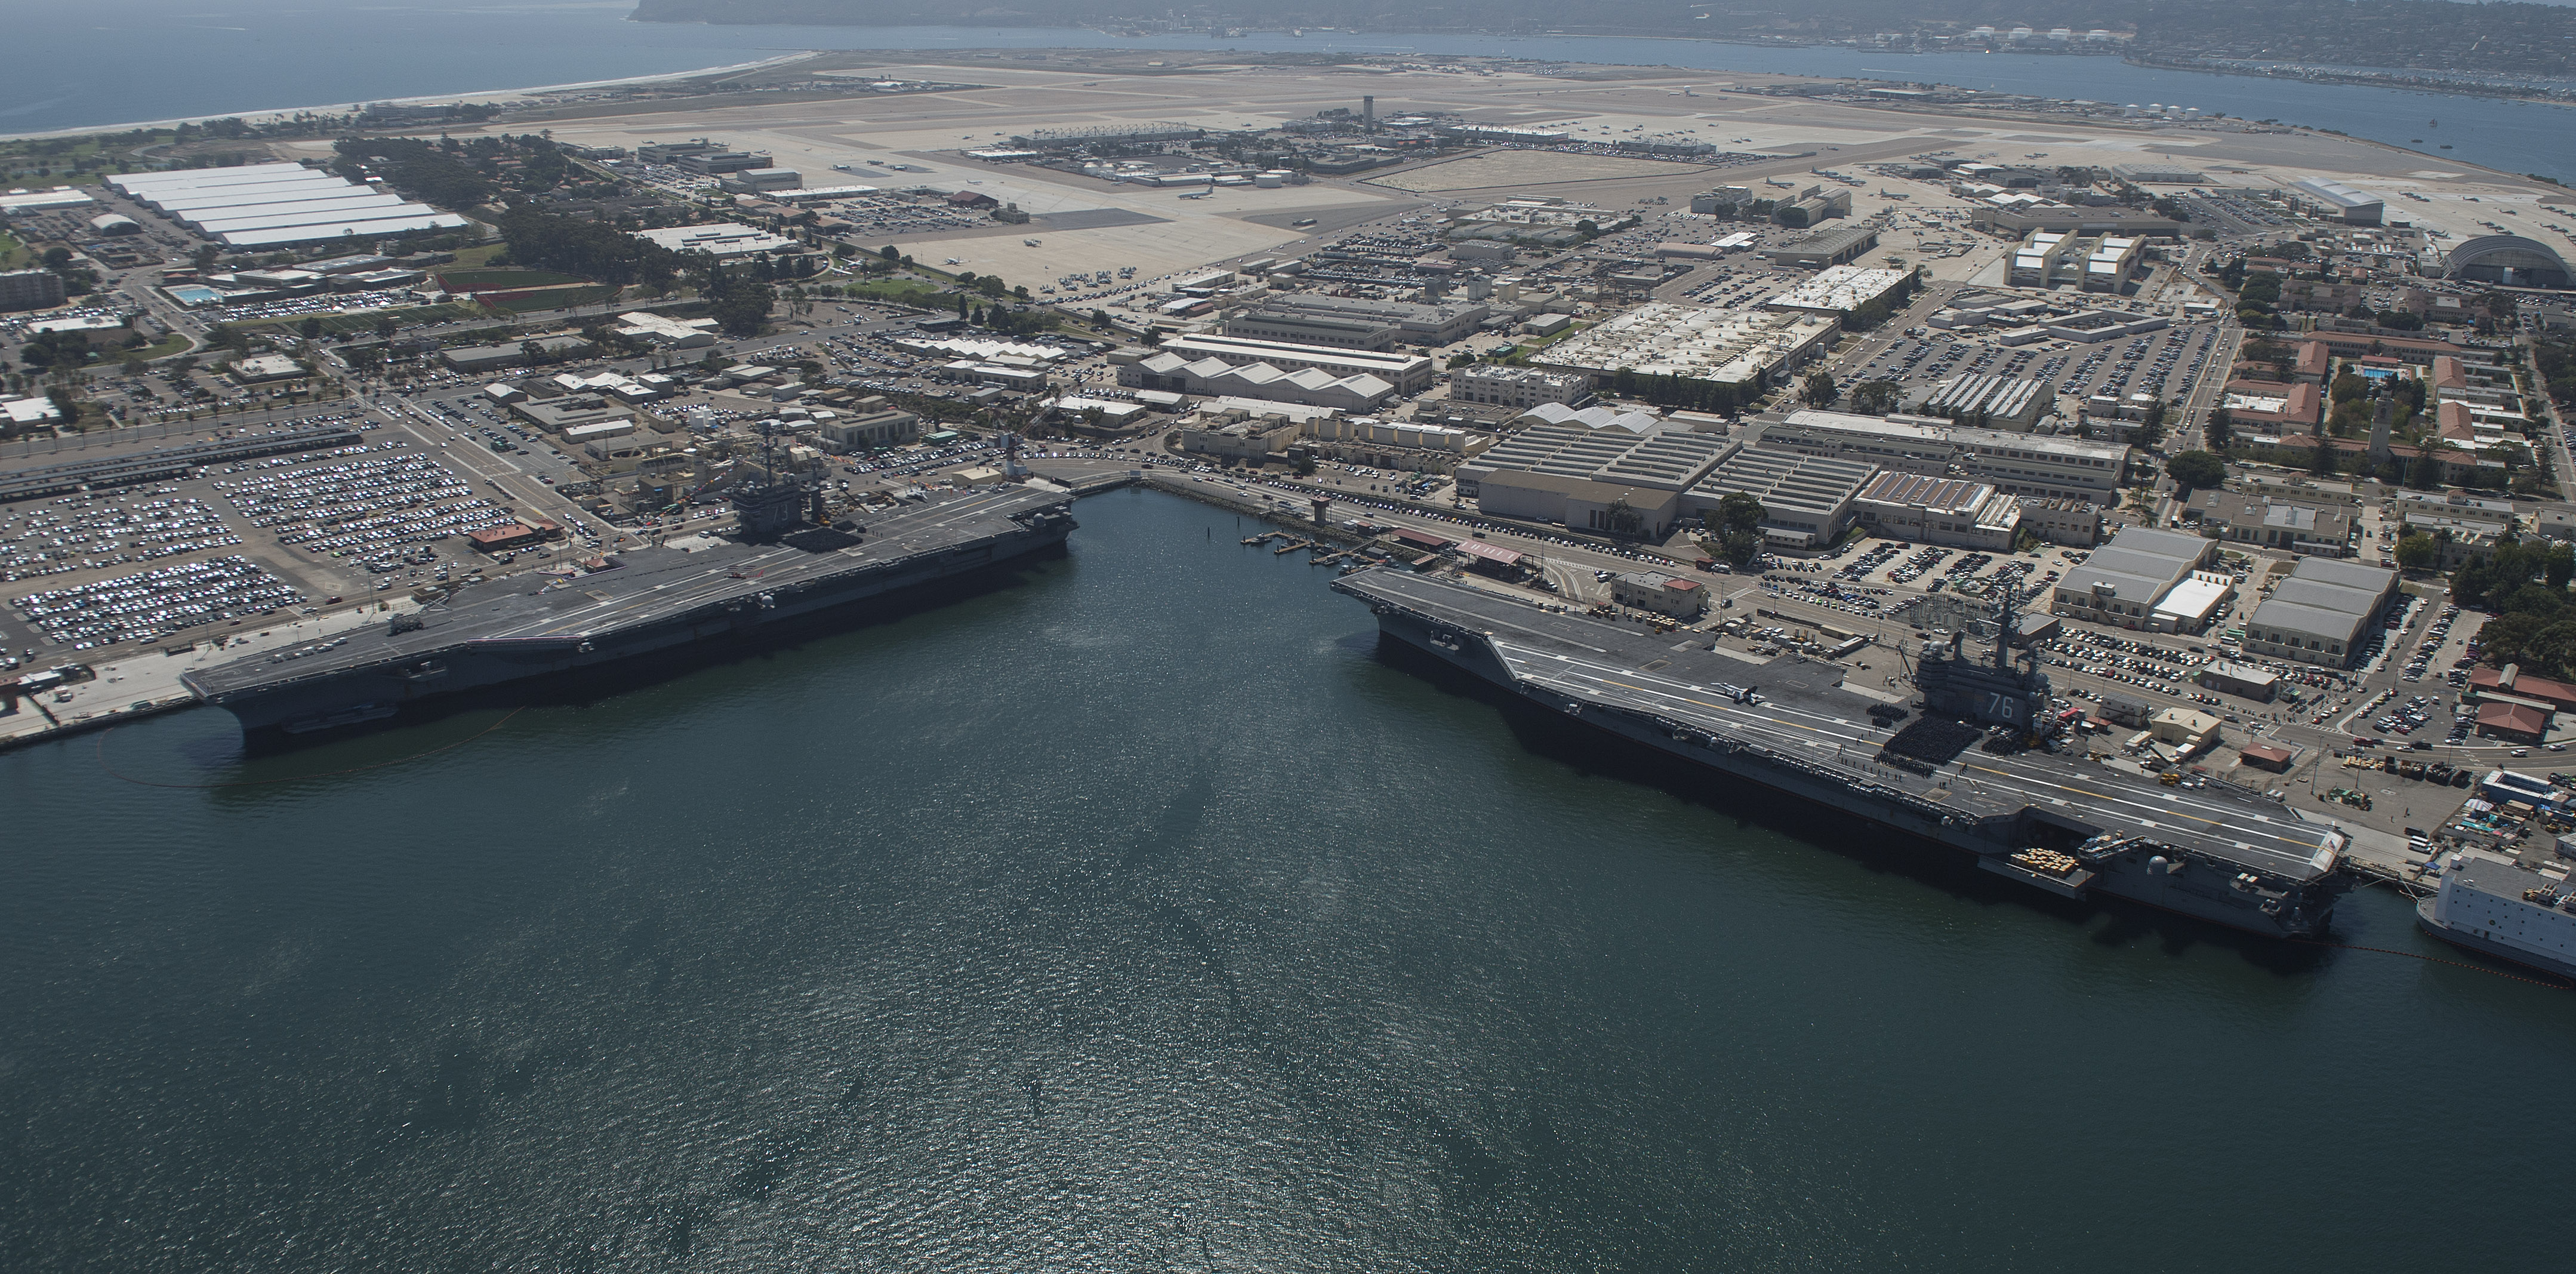 Carrier USS Washington Departs San Diego After 4Day Delay for